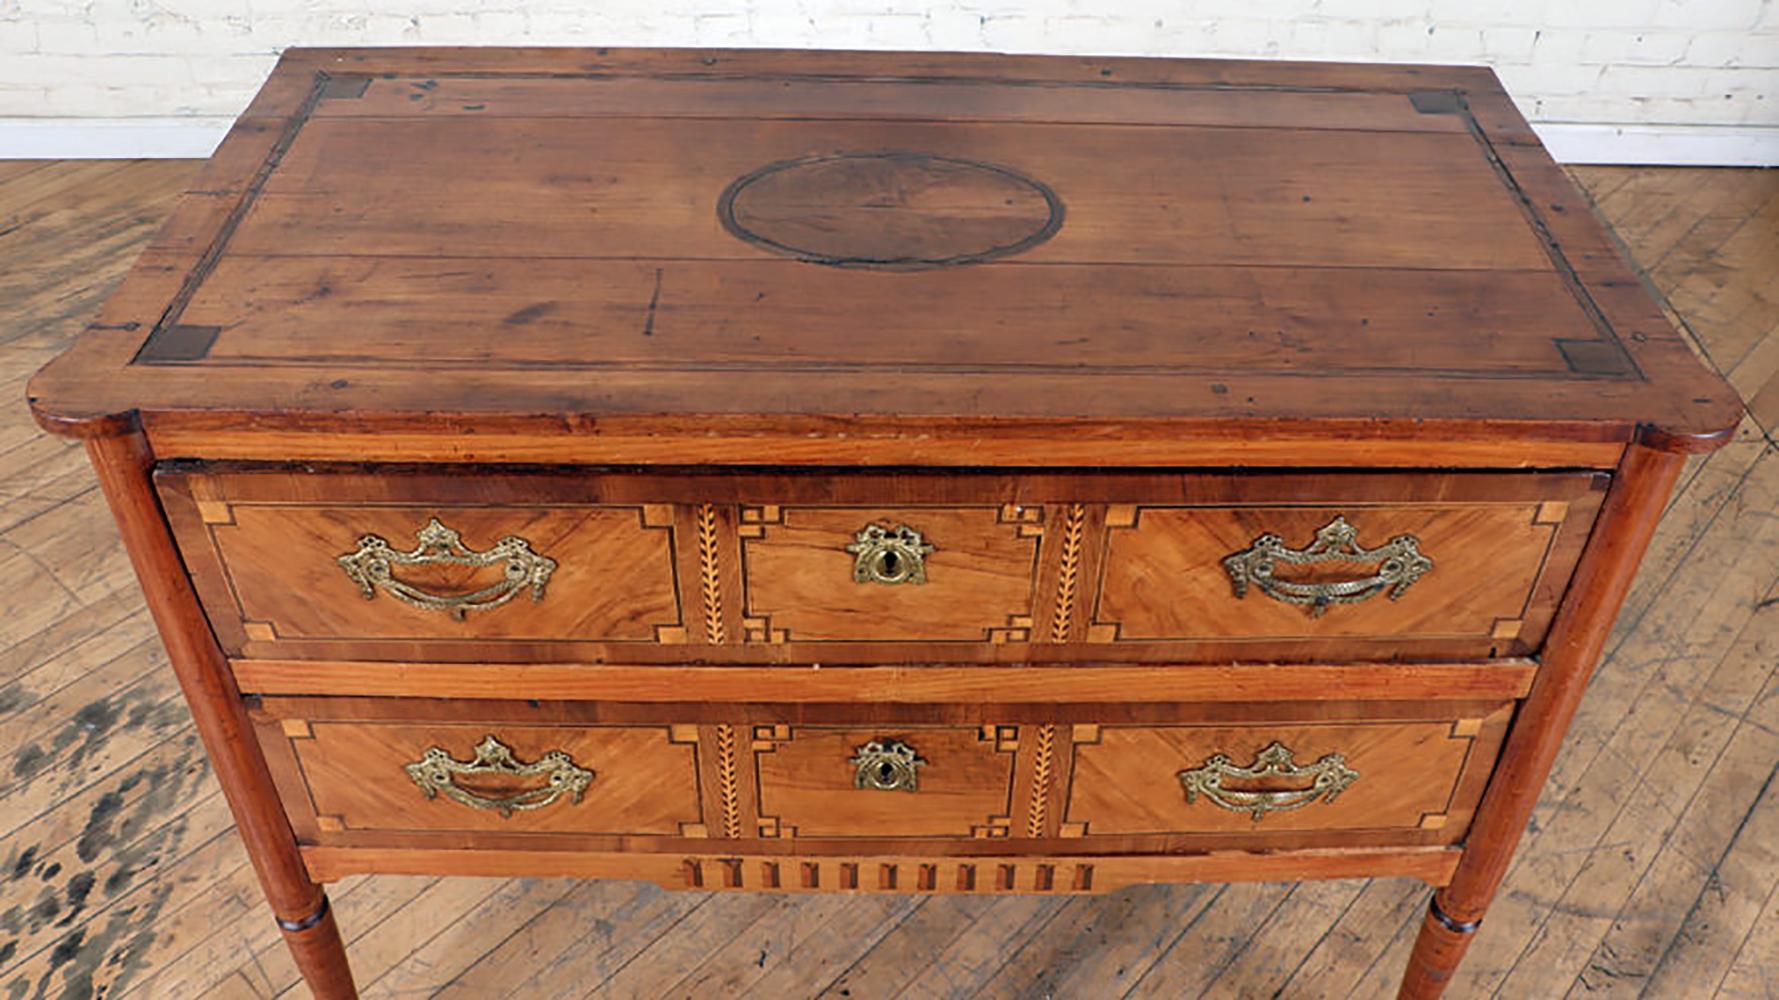 Antique French parquetry commode in the neoclassic manner- featuring two drawers on elegantly tapered legs.